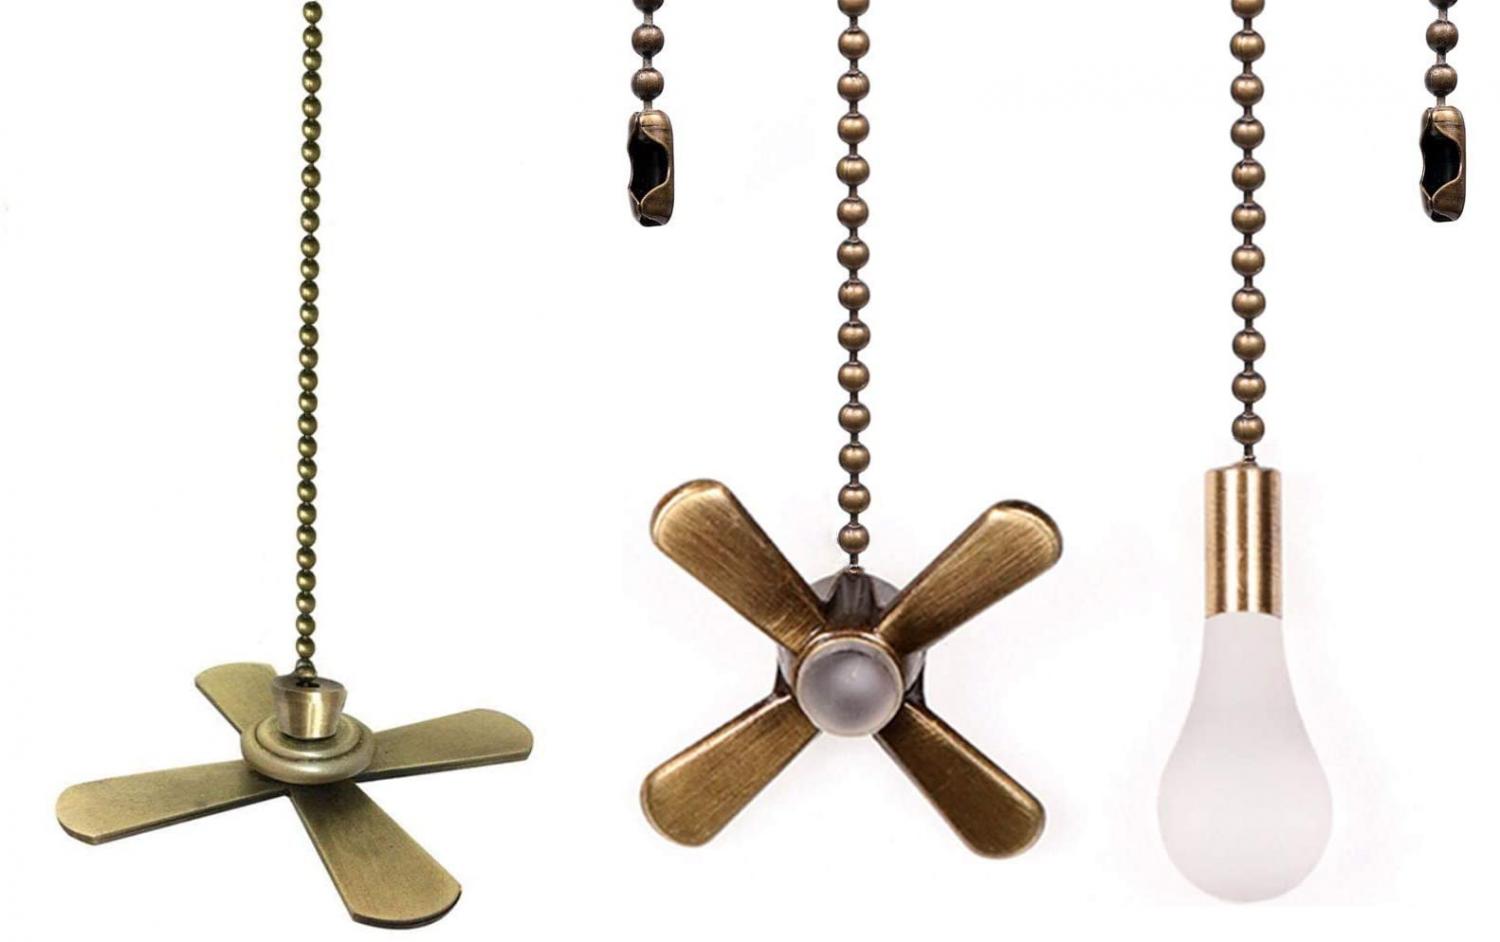 Fan and Light Bulb shaped pull-string chain set